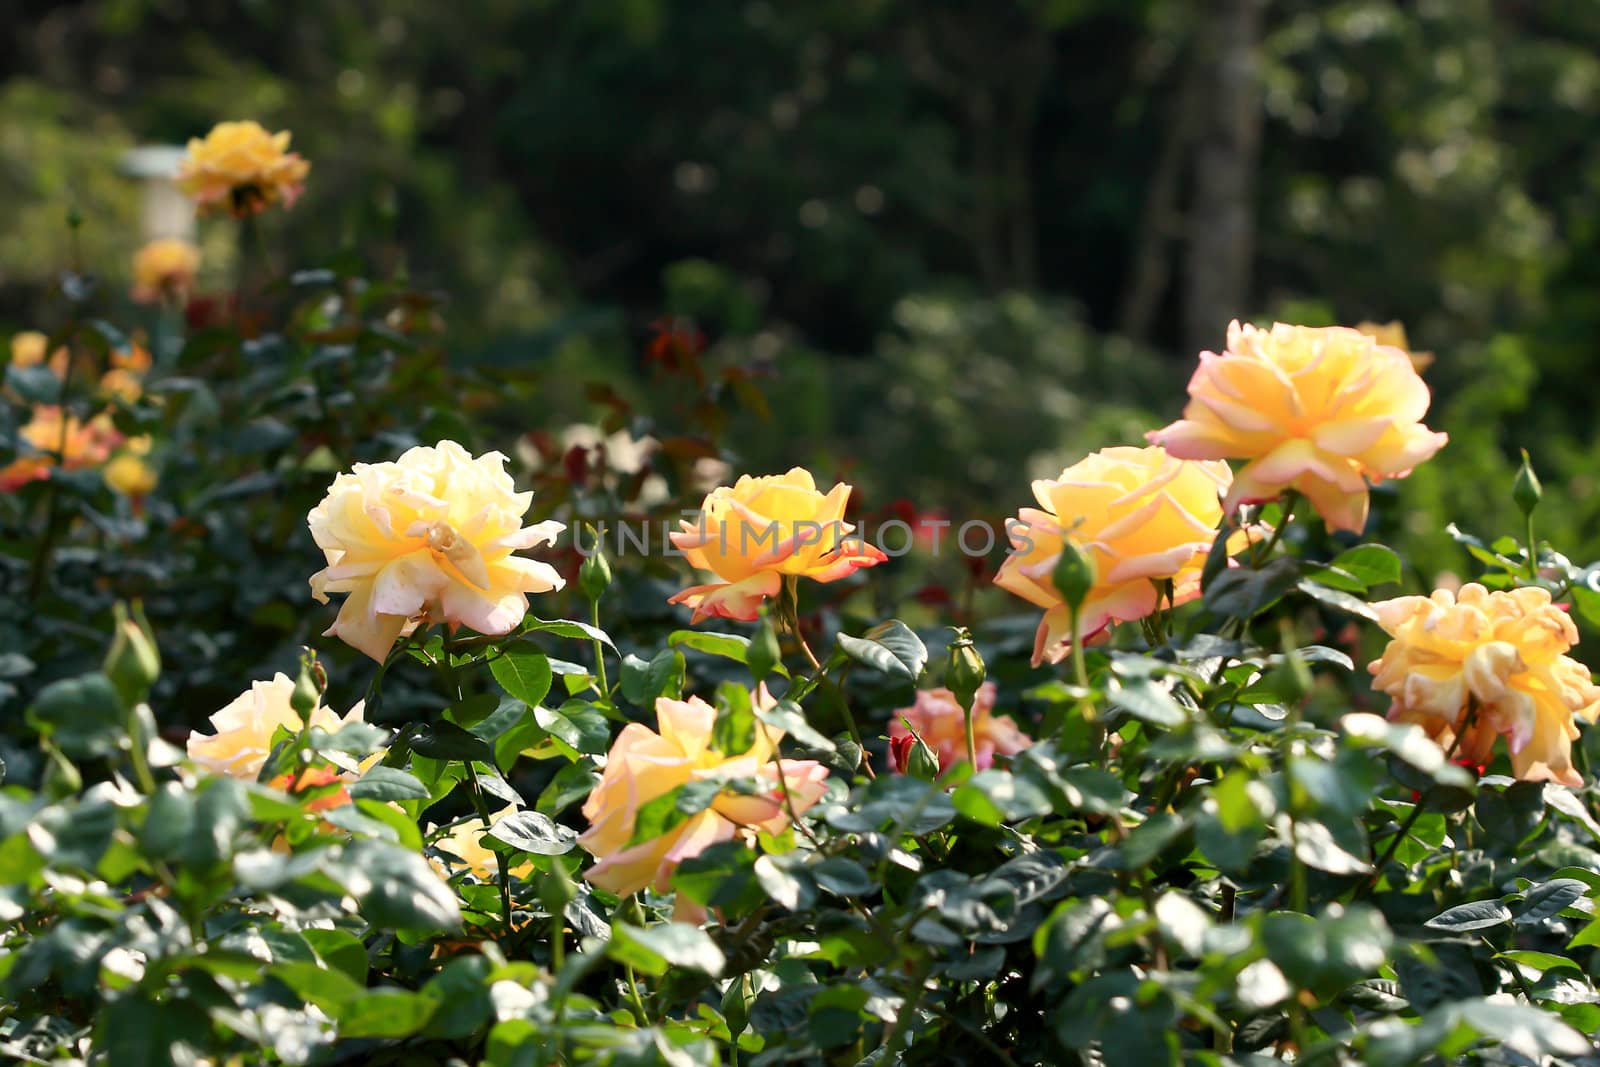 Roses in garden 
 by rufous